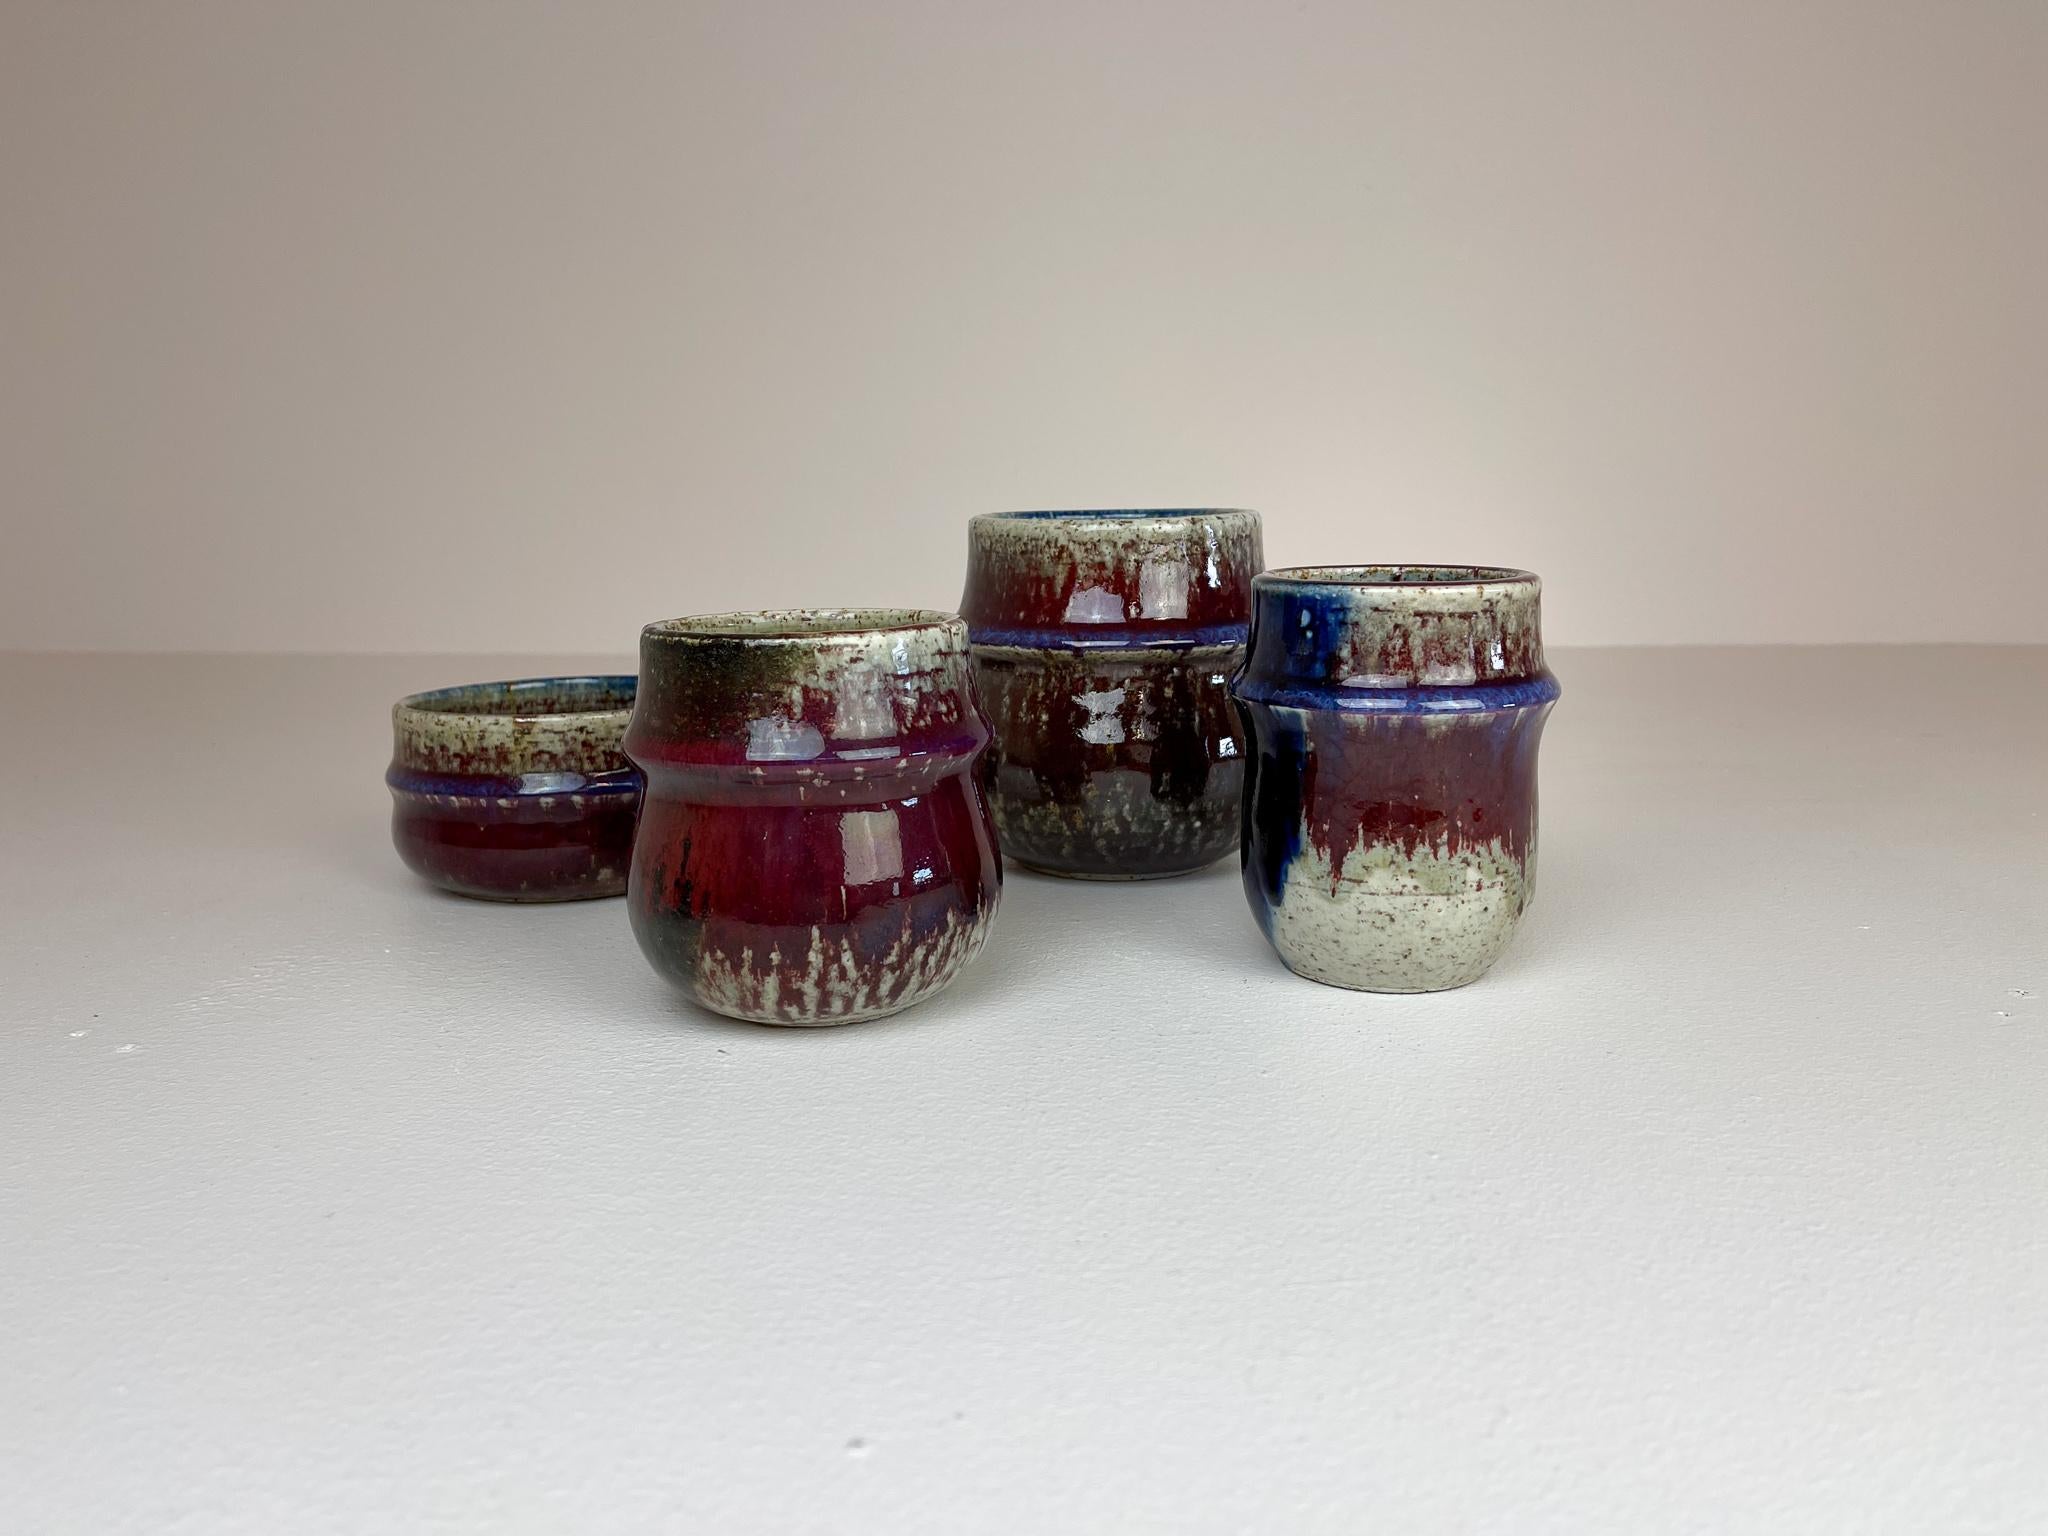 This set containing 4 pieces ceramic was designed by Sylvia Leuchovius and produced by Rörstrand. These four pieces are marked as studio ceramic and are well sculptured with a stunning glaze. They all shift in color as the glaze give them all that